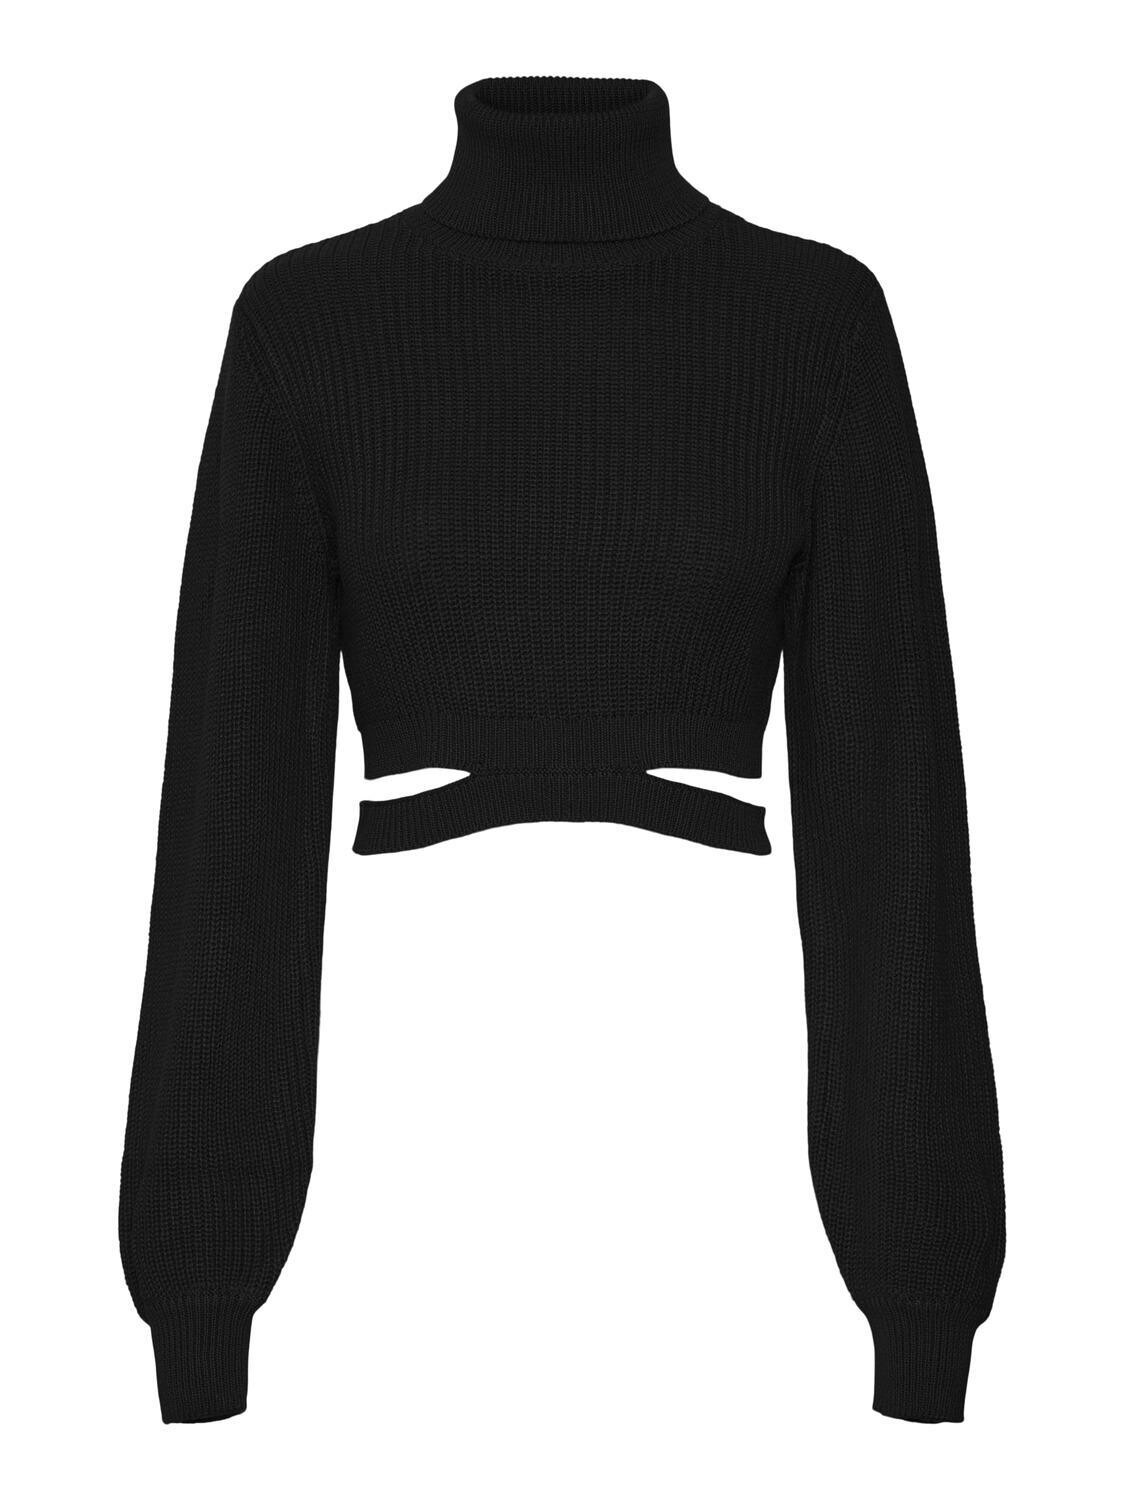 NMBERGHAN L/S ROLL NECK KNIT Black